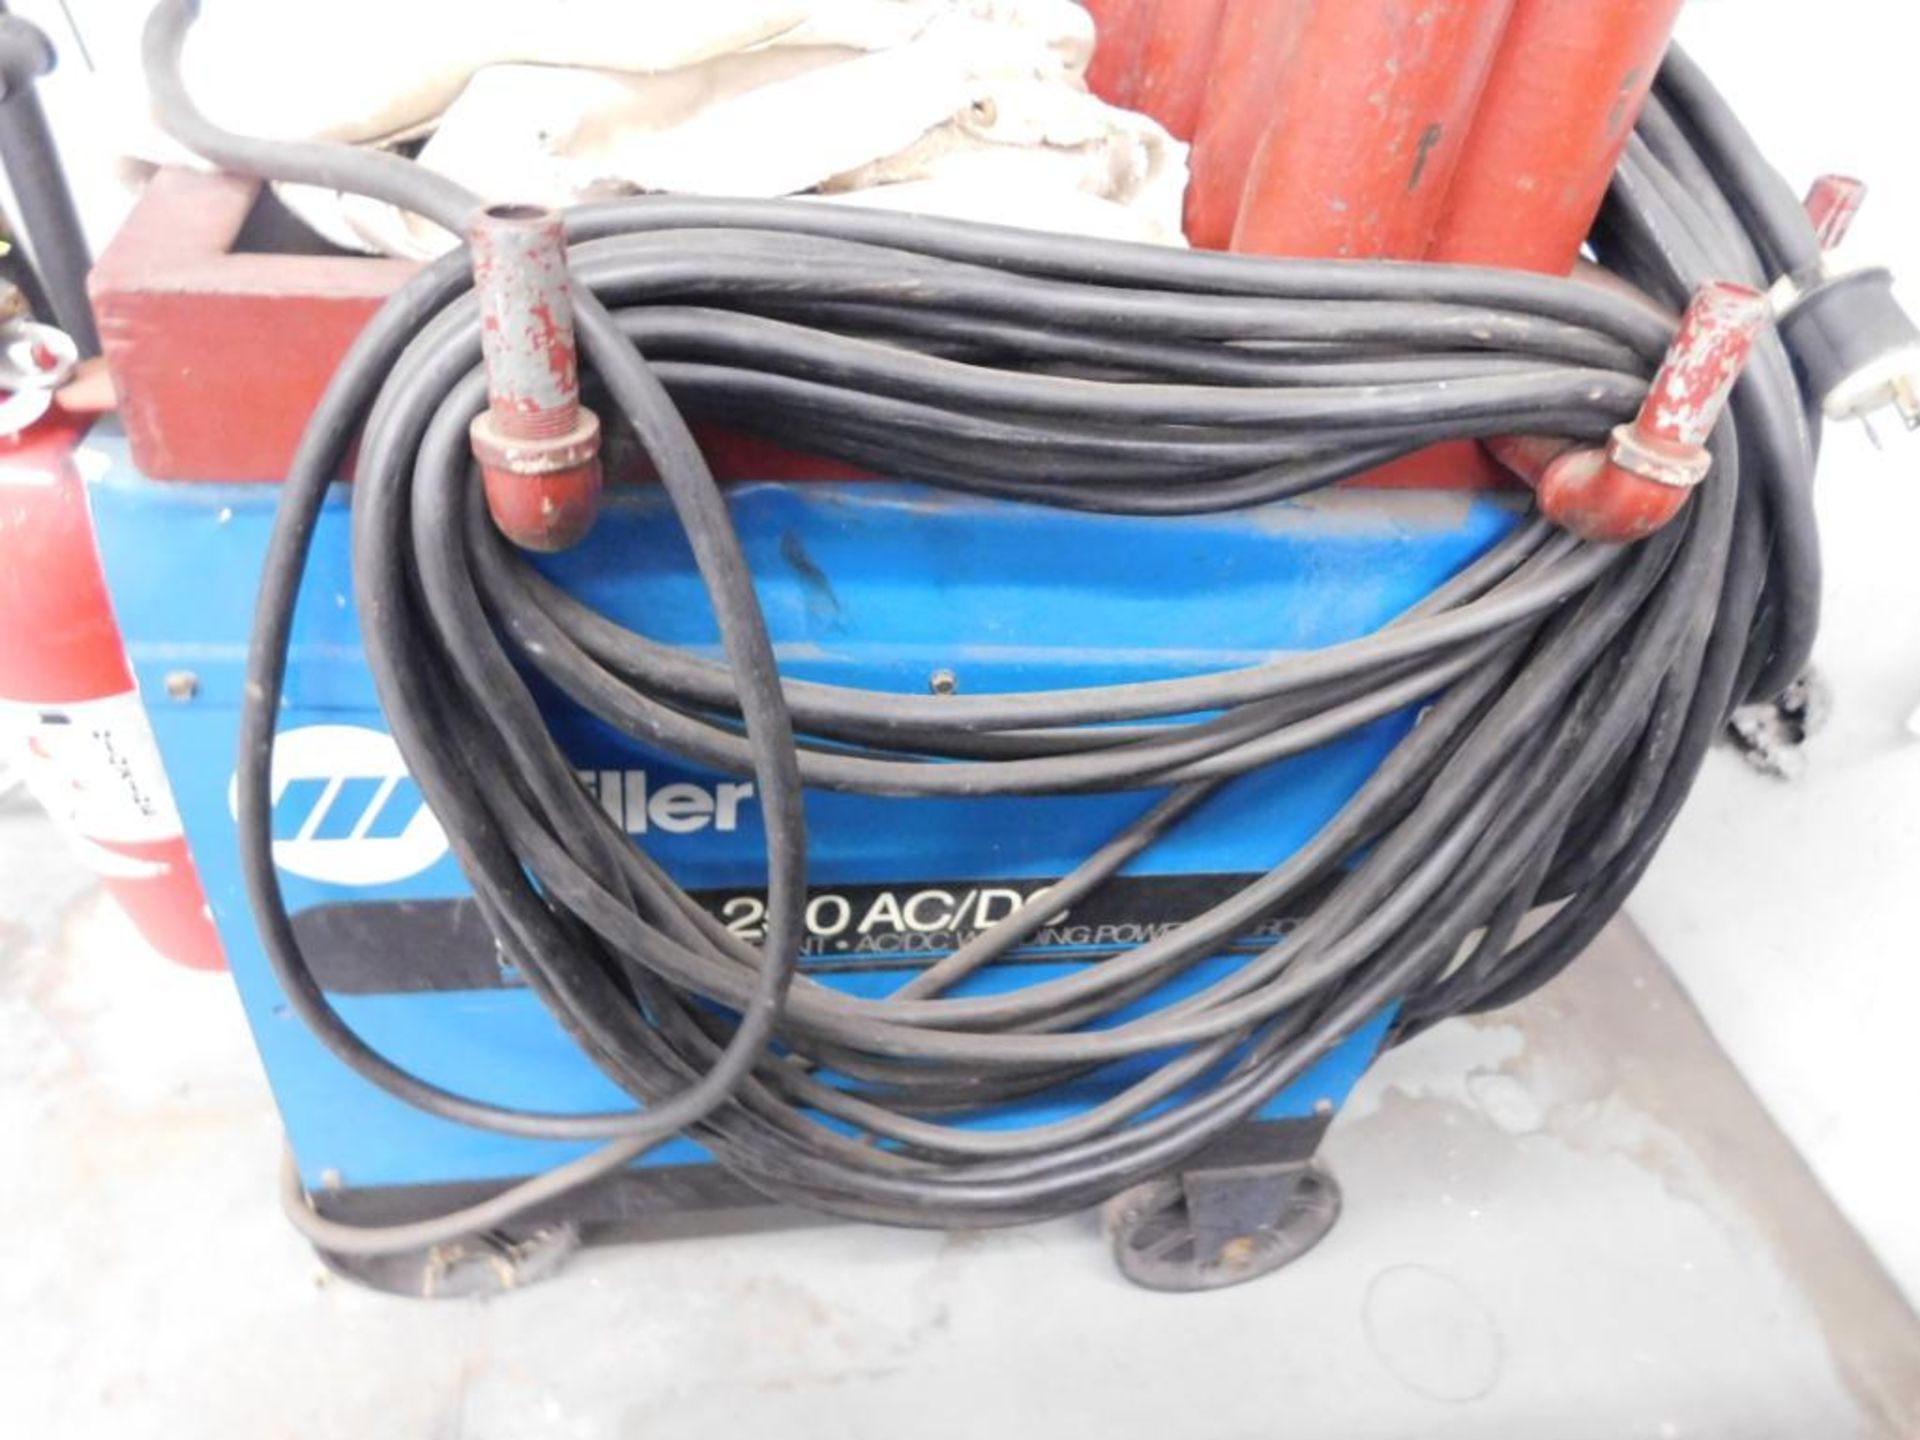 DIALARC 250 AC/DC CONSTANT CURRENT AC/DC ARC WELDING POWER SOURCE, S/N KE642080 - Image 2 of 4